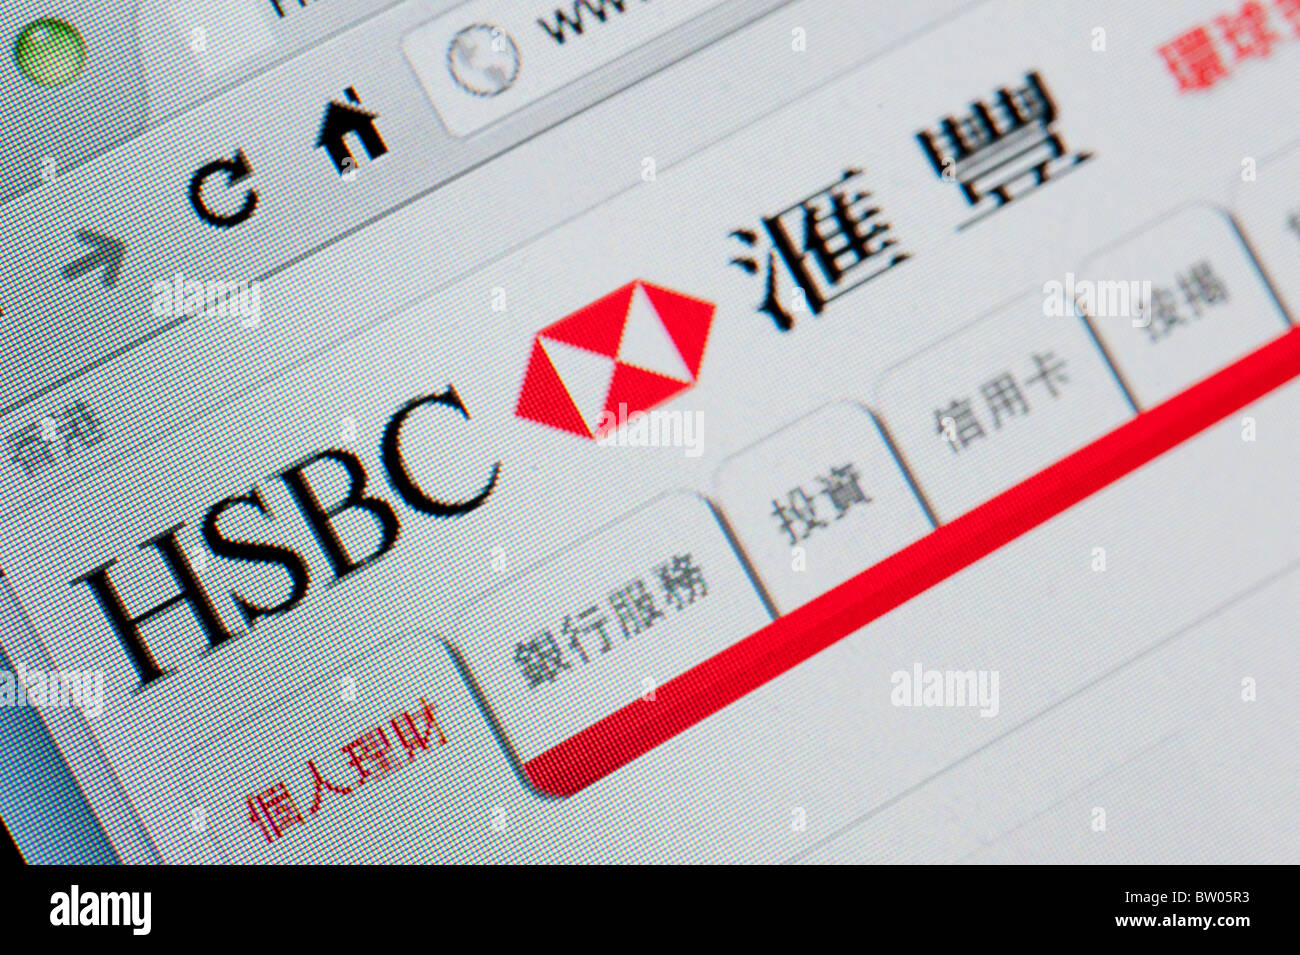 Detail Of Screenshot From Website Of Hsbc Bank Online Banking Hong Kong Chinese Homepage Stock Photo Alamy